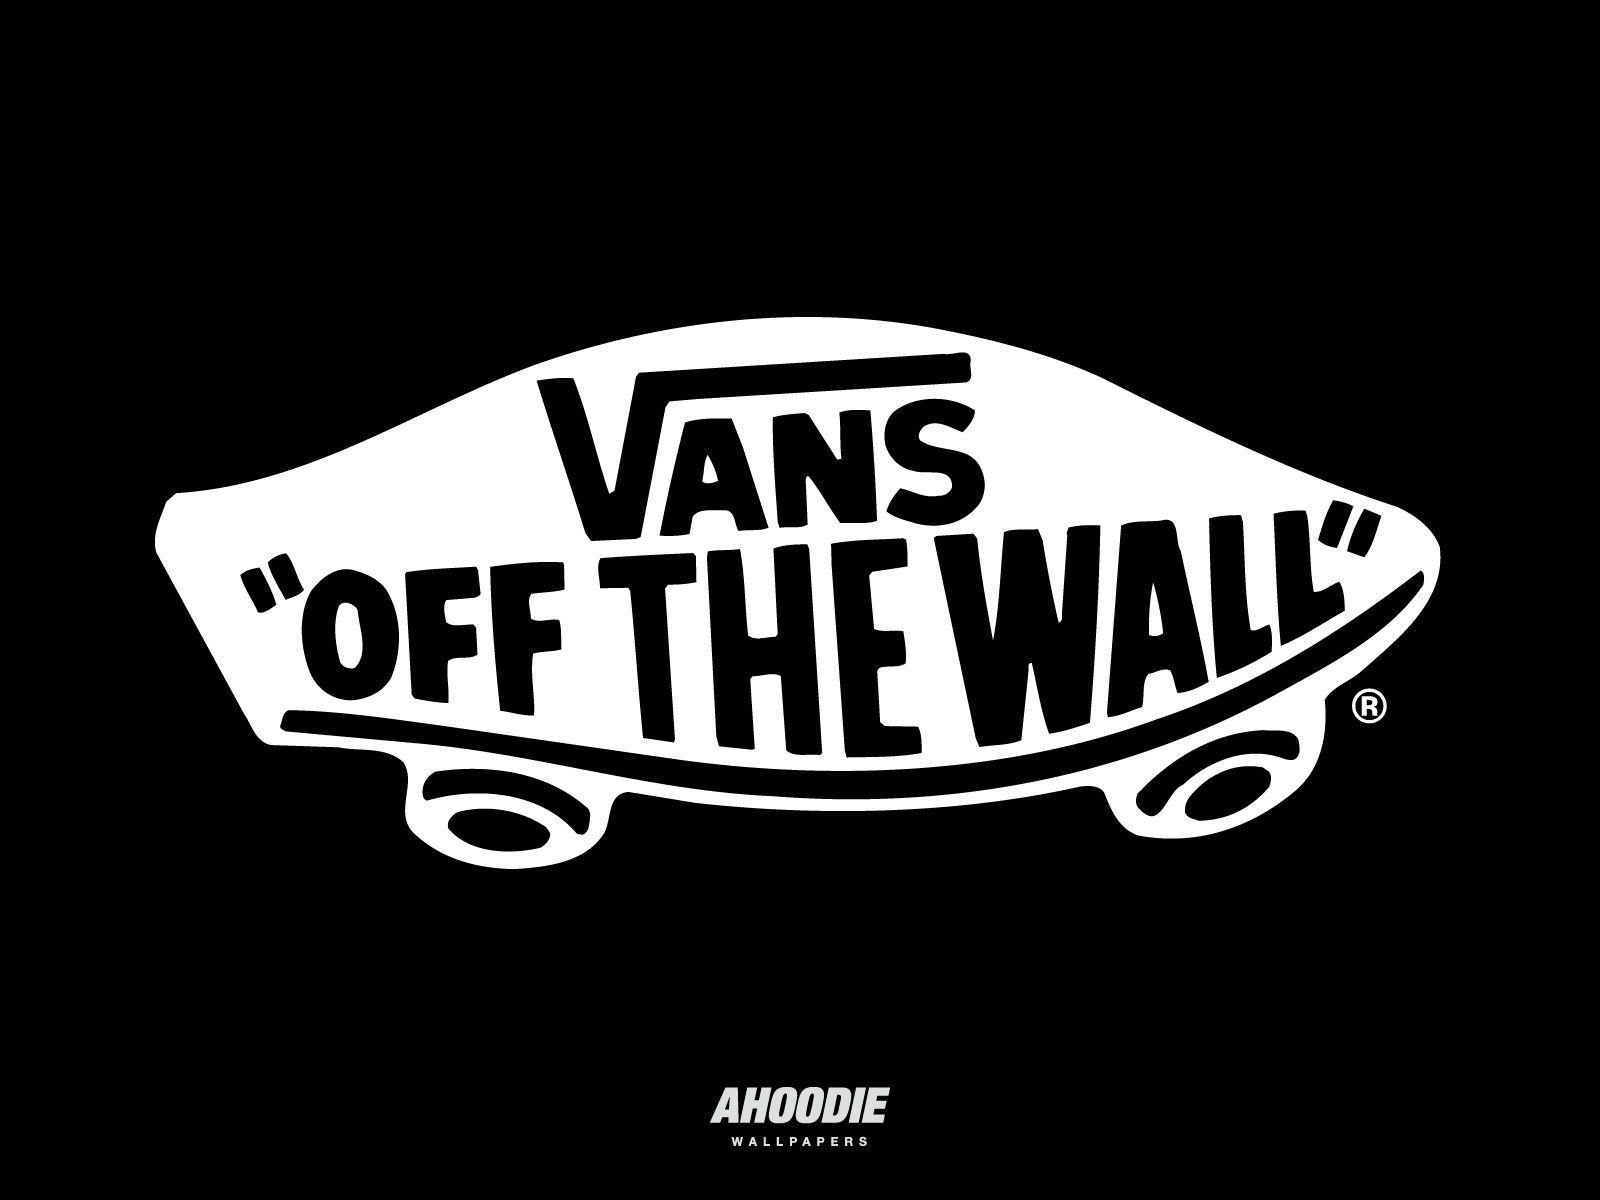 Graffiti Vans Logo - Vans. Havn't worn them in years but I think I might have to pick up ...